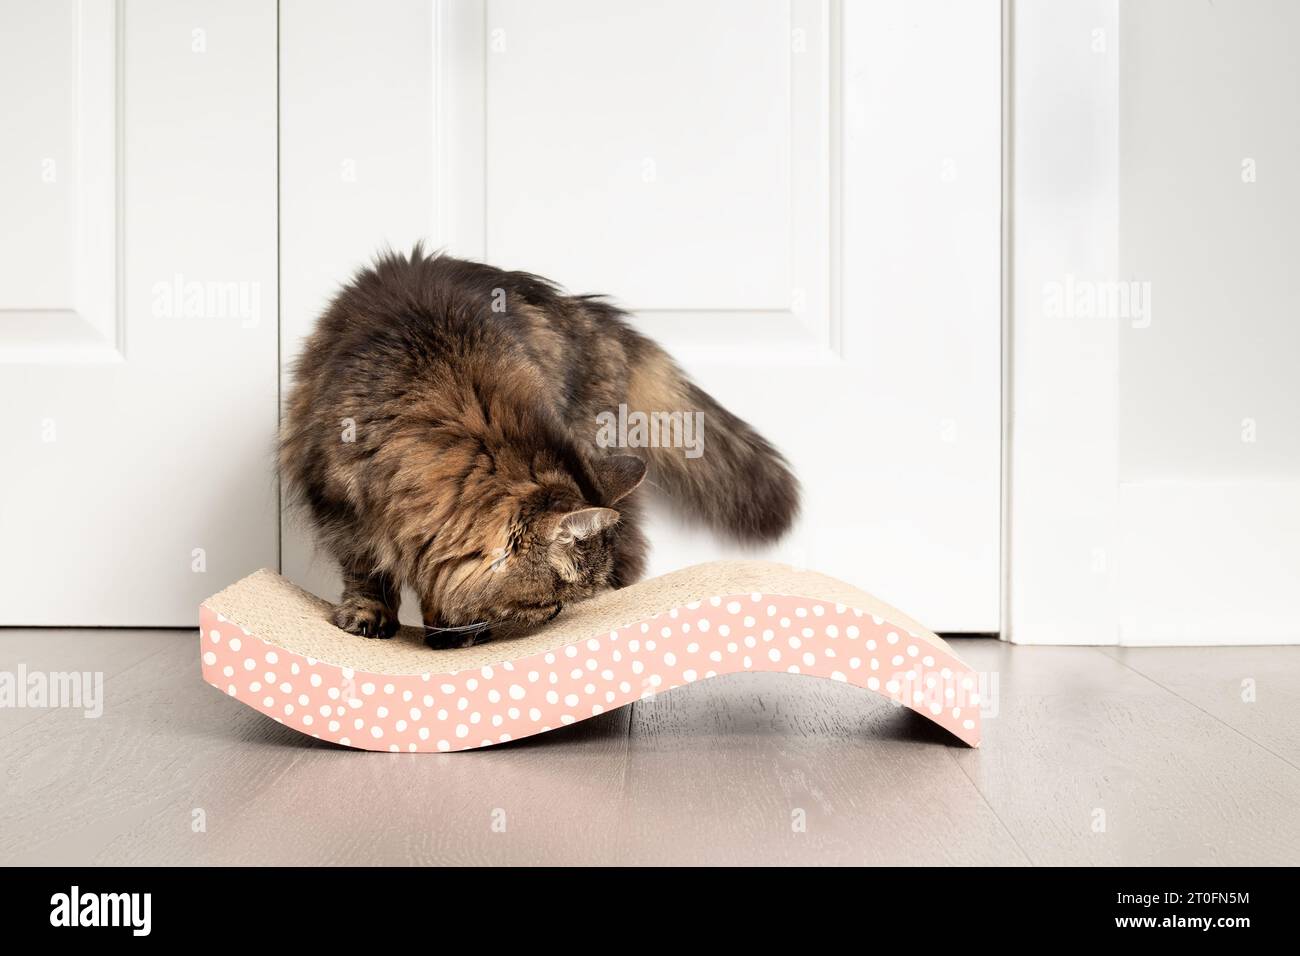 Curious cat with cardboard scratcher on floor. Senior tabby cat smelling cat nip on curved card board scratcher for scratching and prevent furniture d Stock Photo